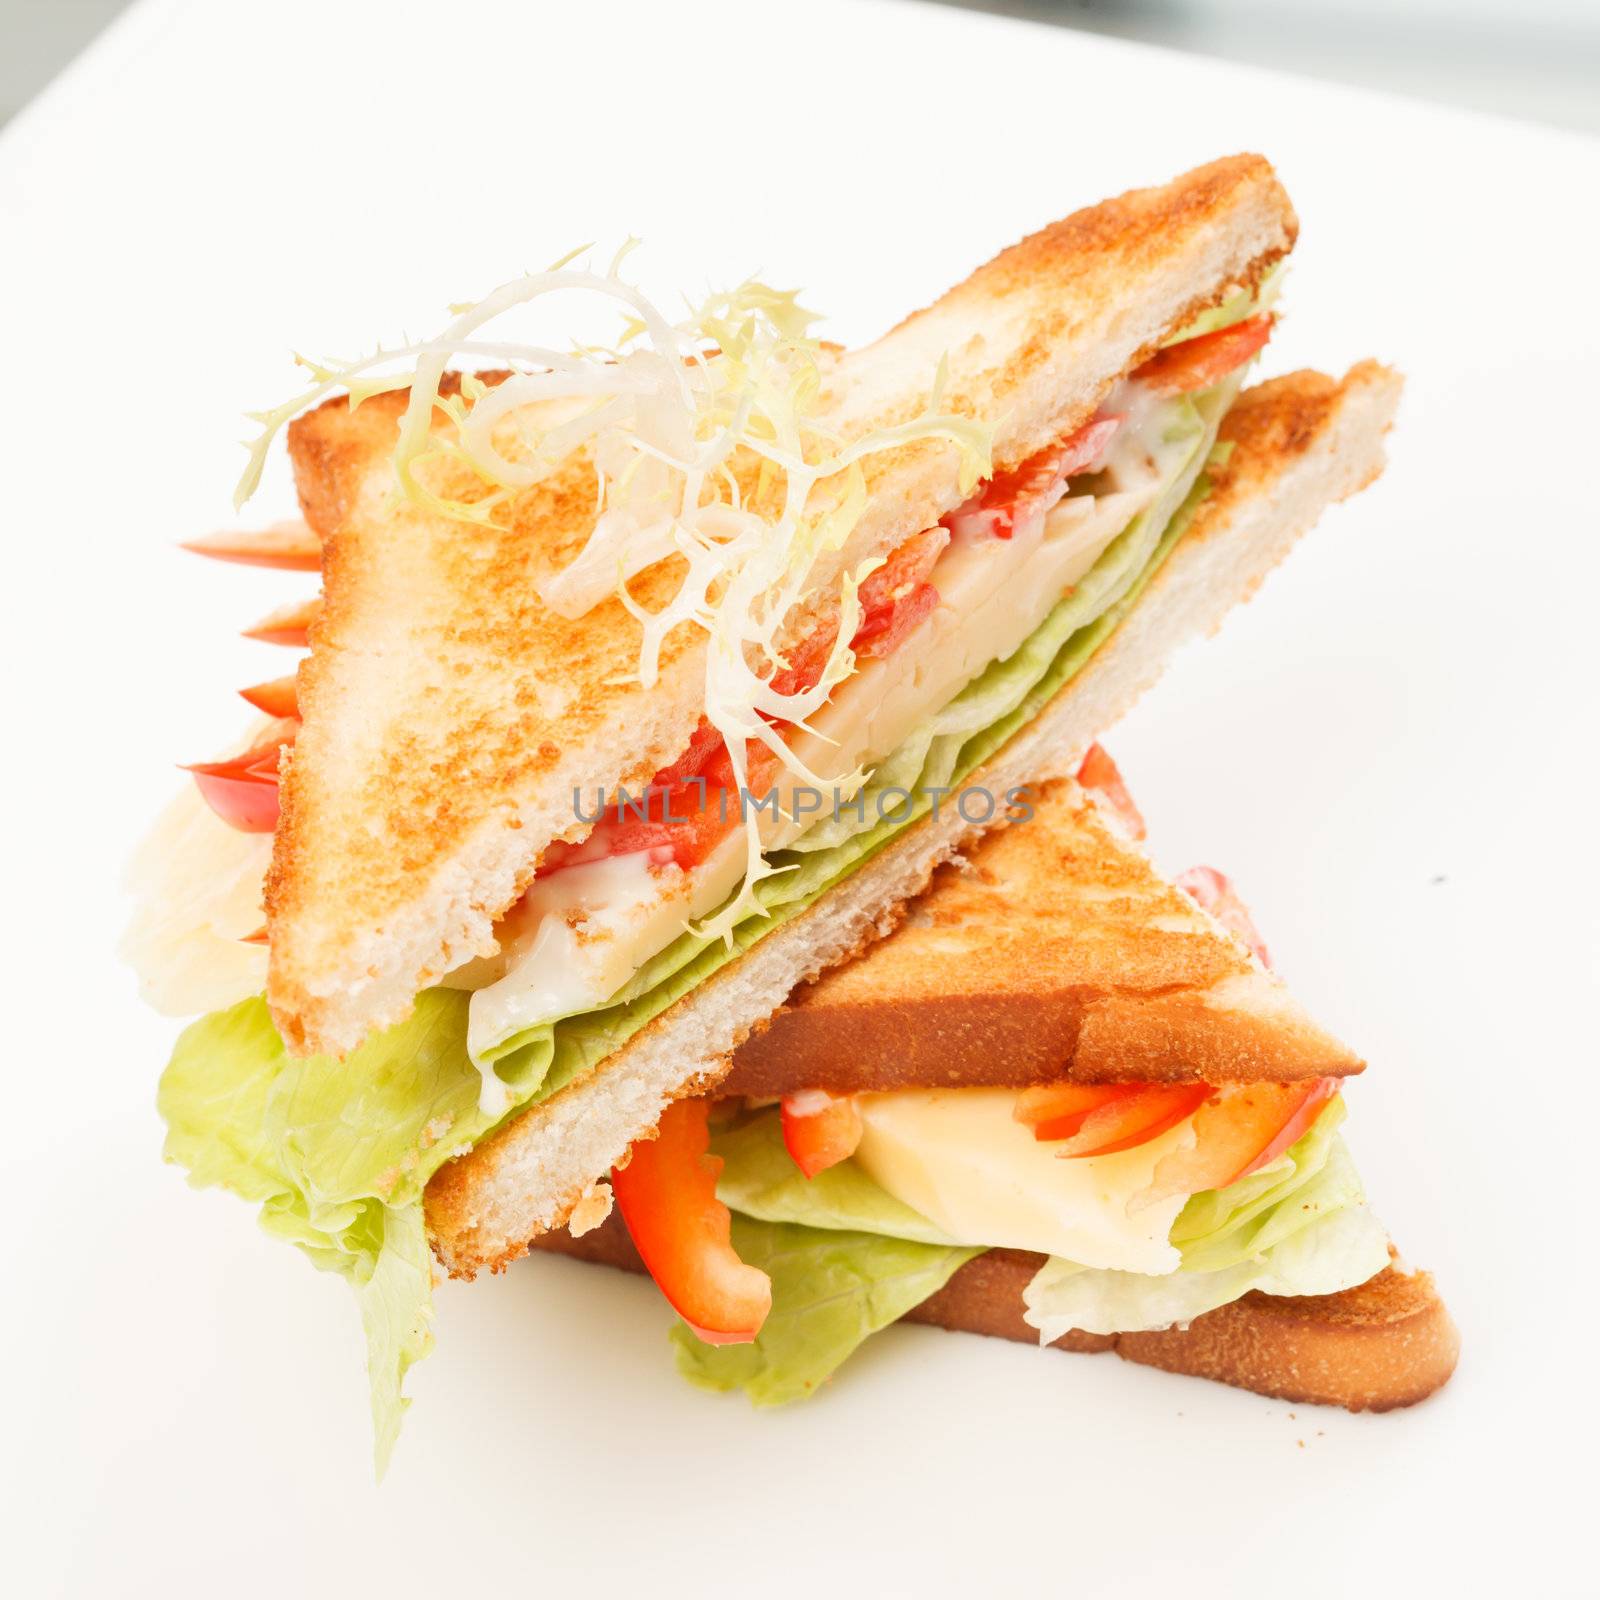 sandwiches with vegetables and cheese